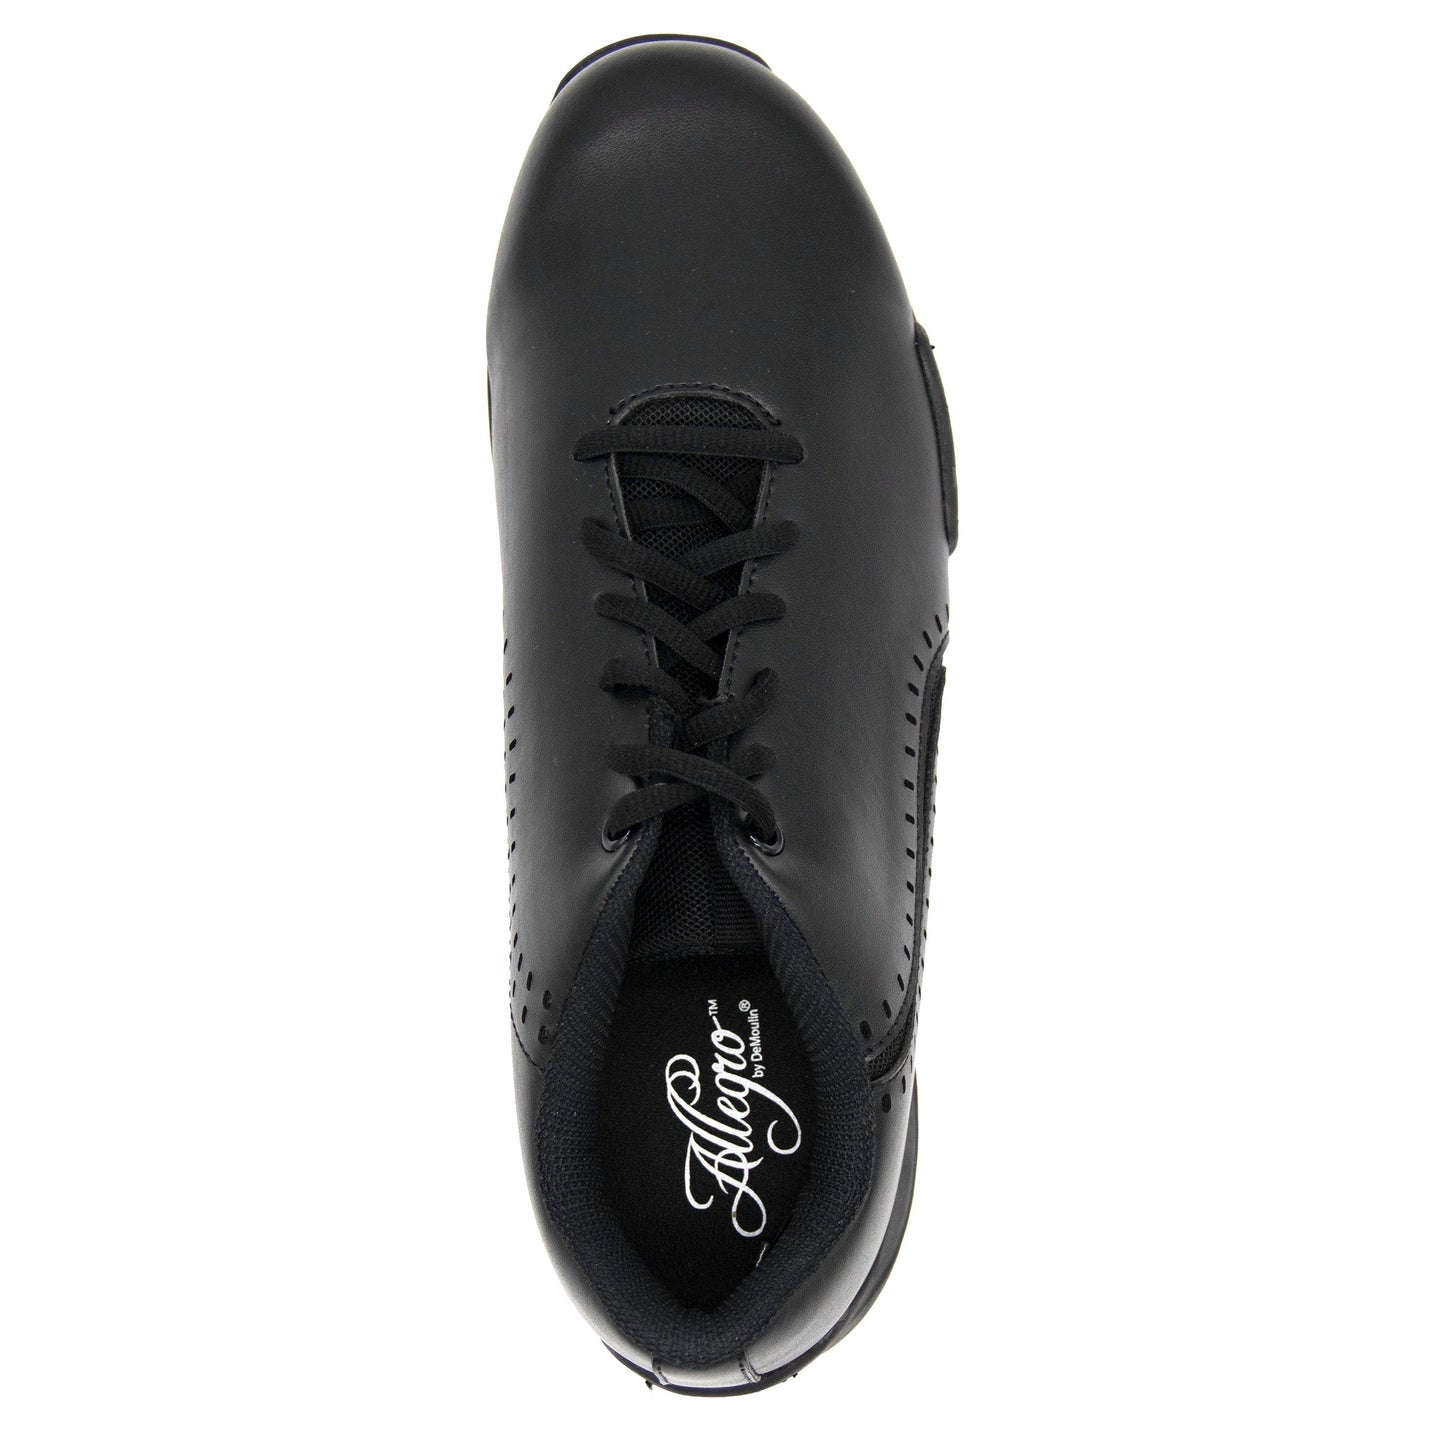 New! Allegro by DeMoulin™ Marching Band Shoe